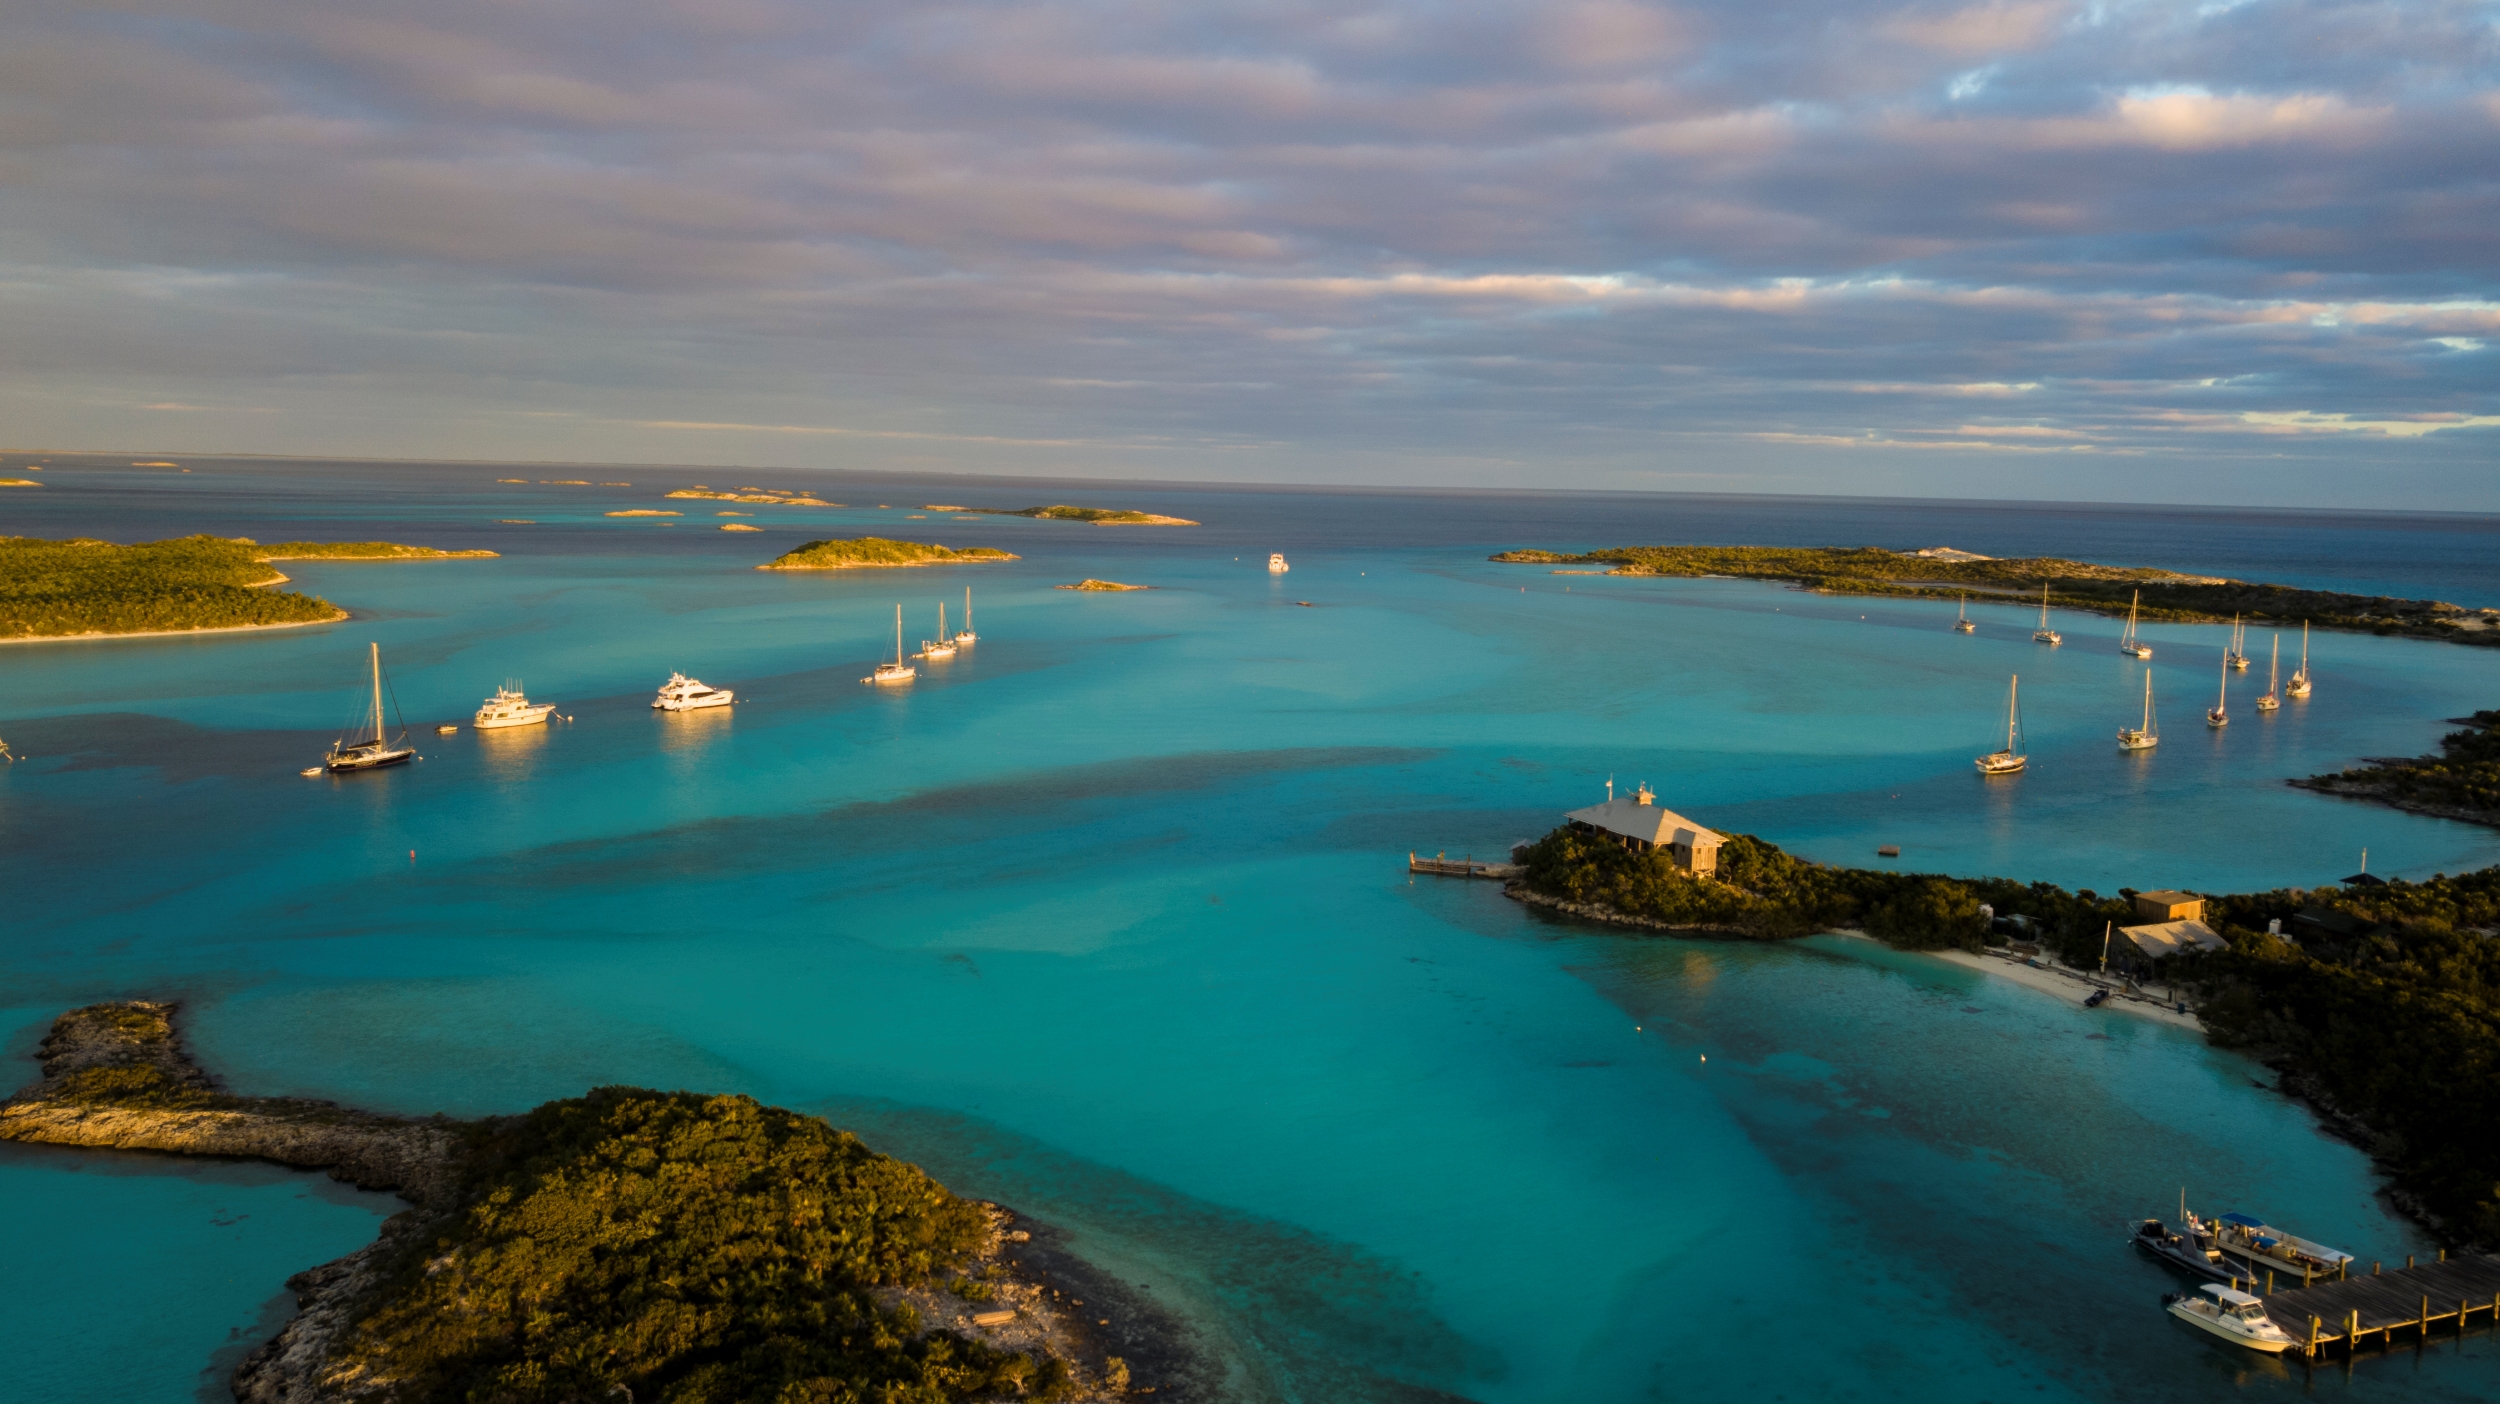 Sunset over Warderick Wells in the Exuma Cays Land and Sea Park